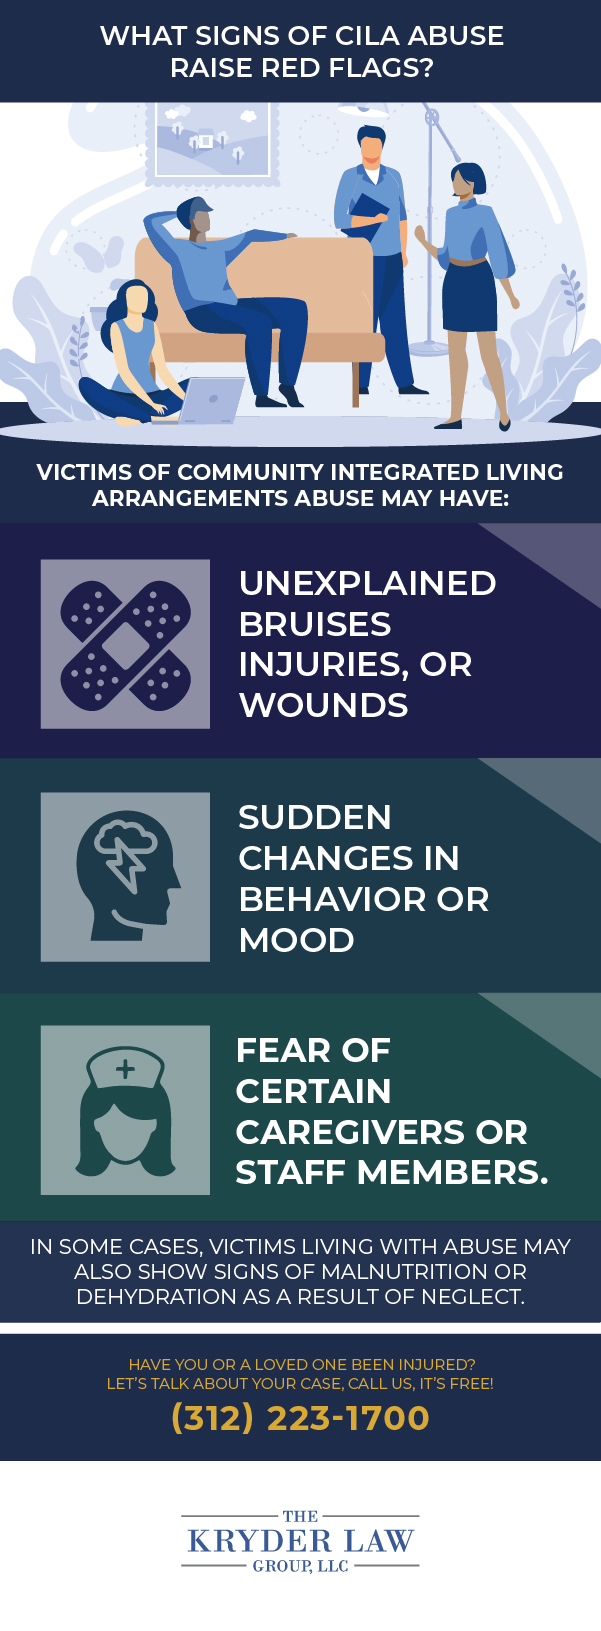 What Signs of CILA Abuse Raise Red Flags Infographic